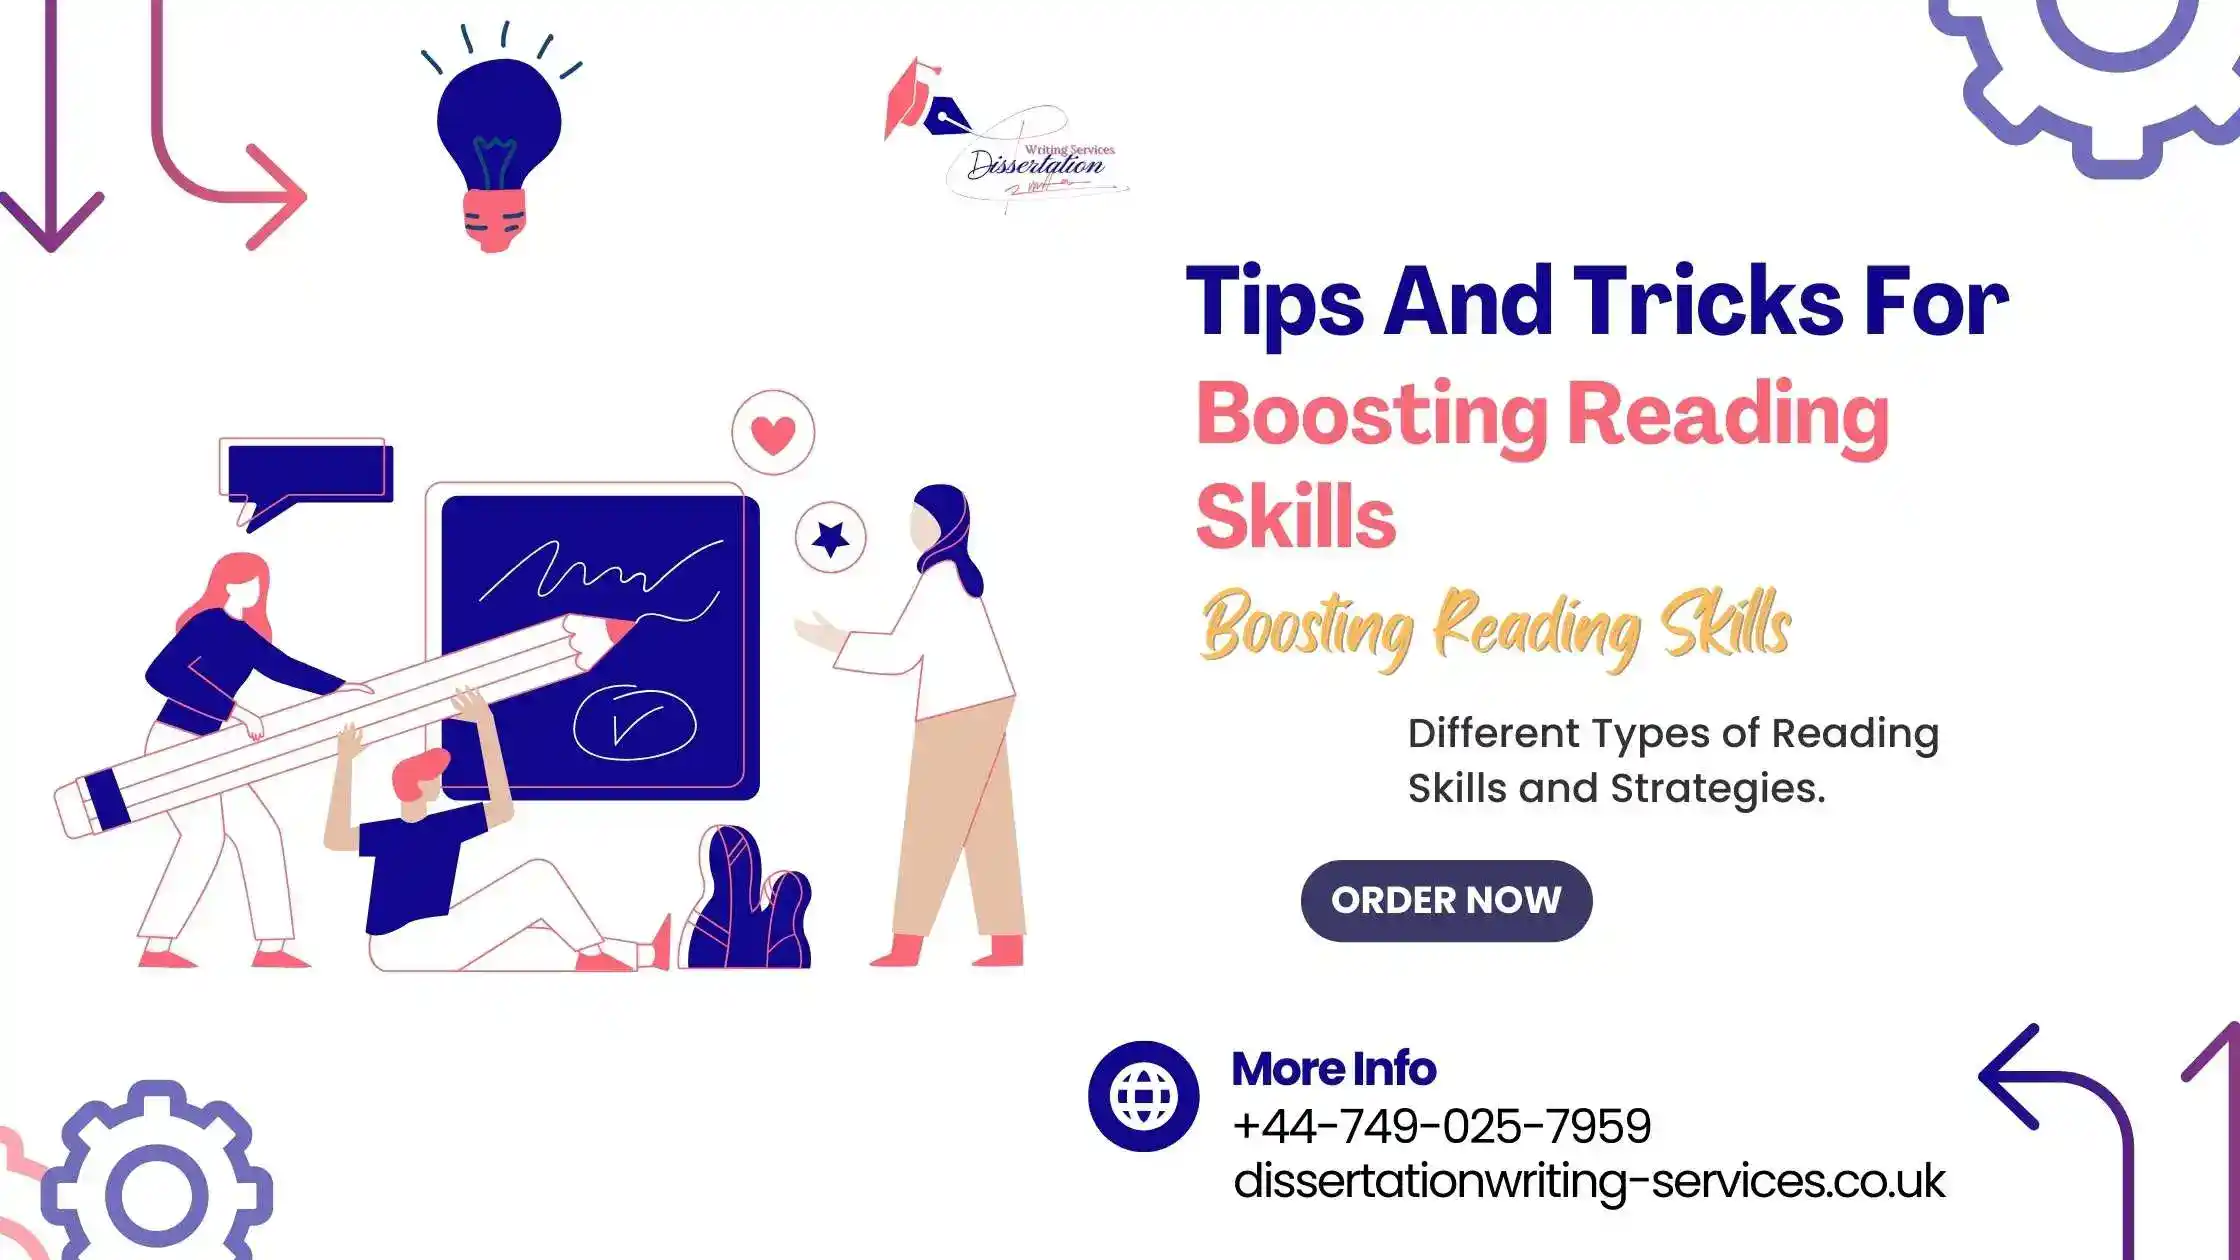 Tips And Tricks For Boosting Reading Skills